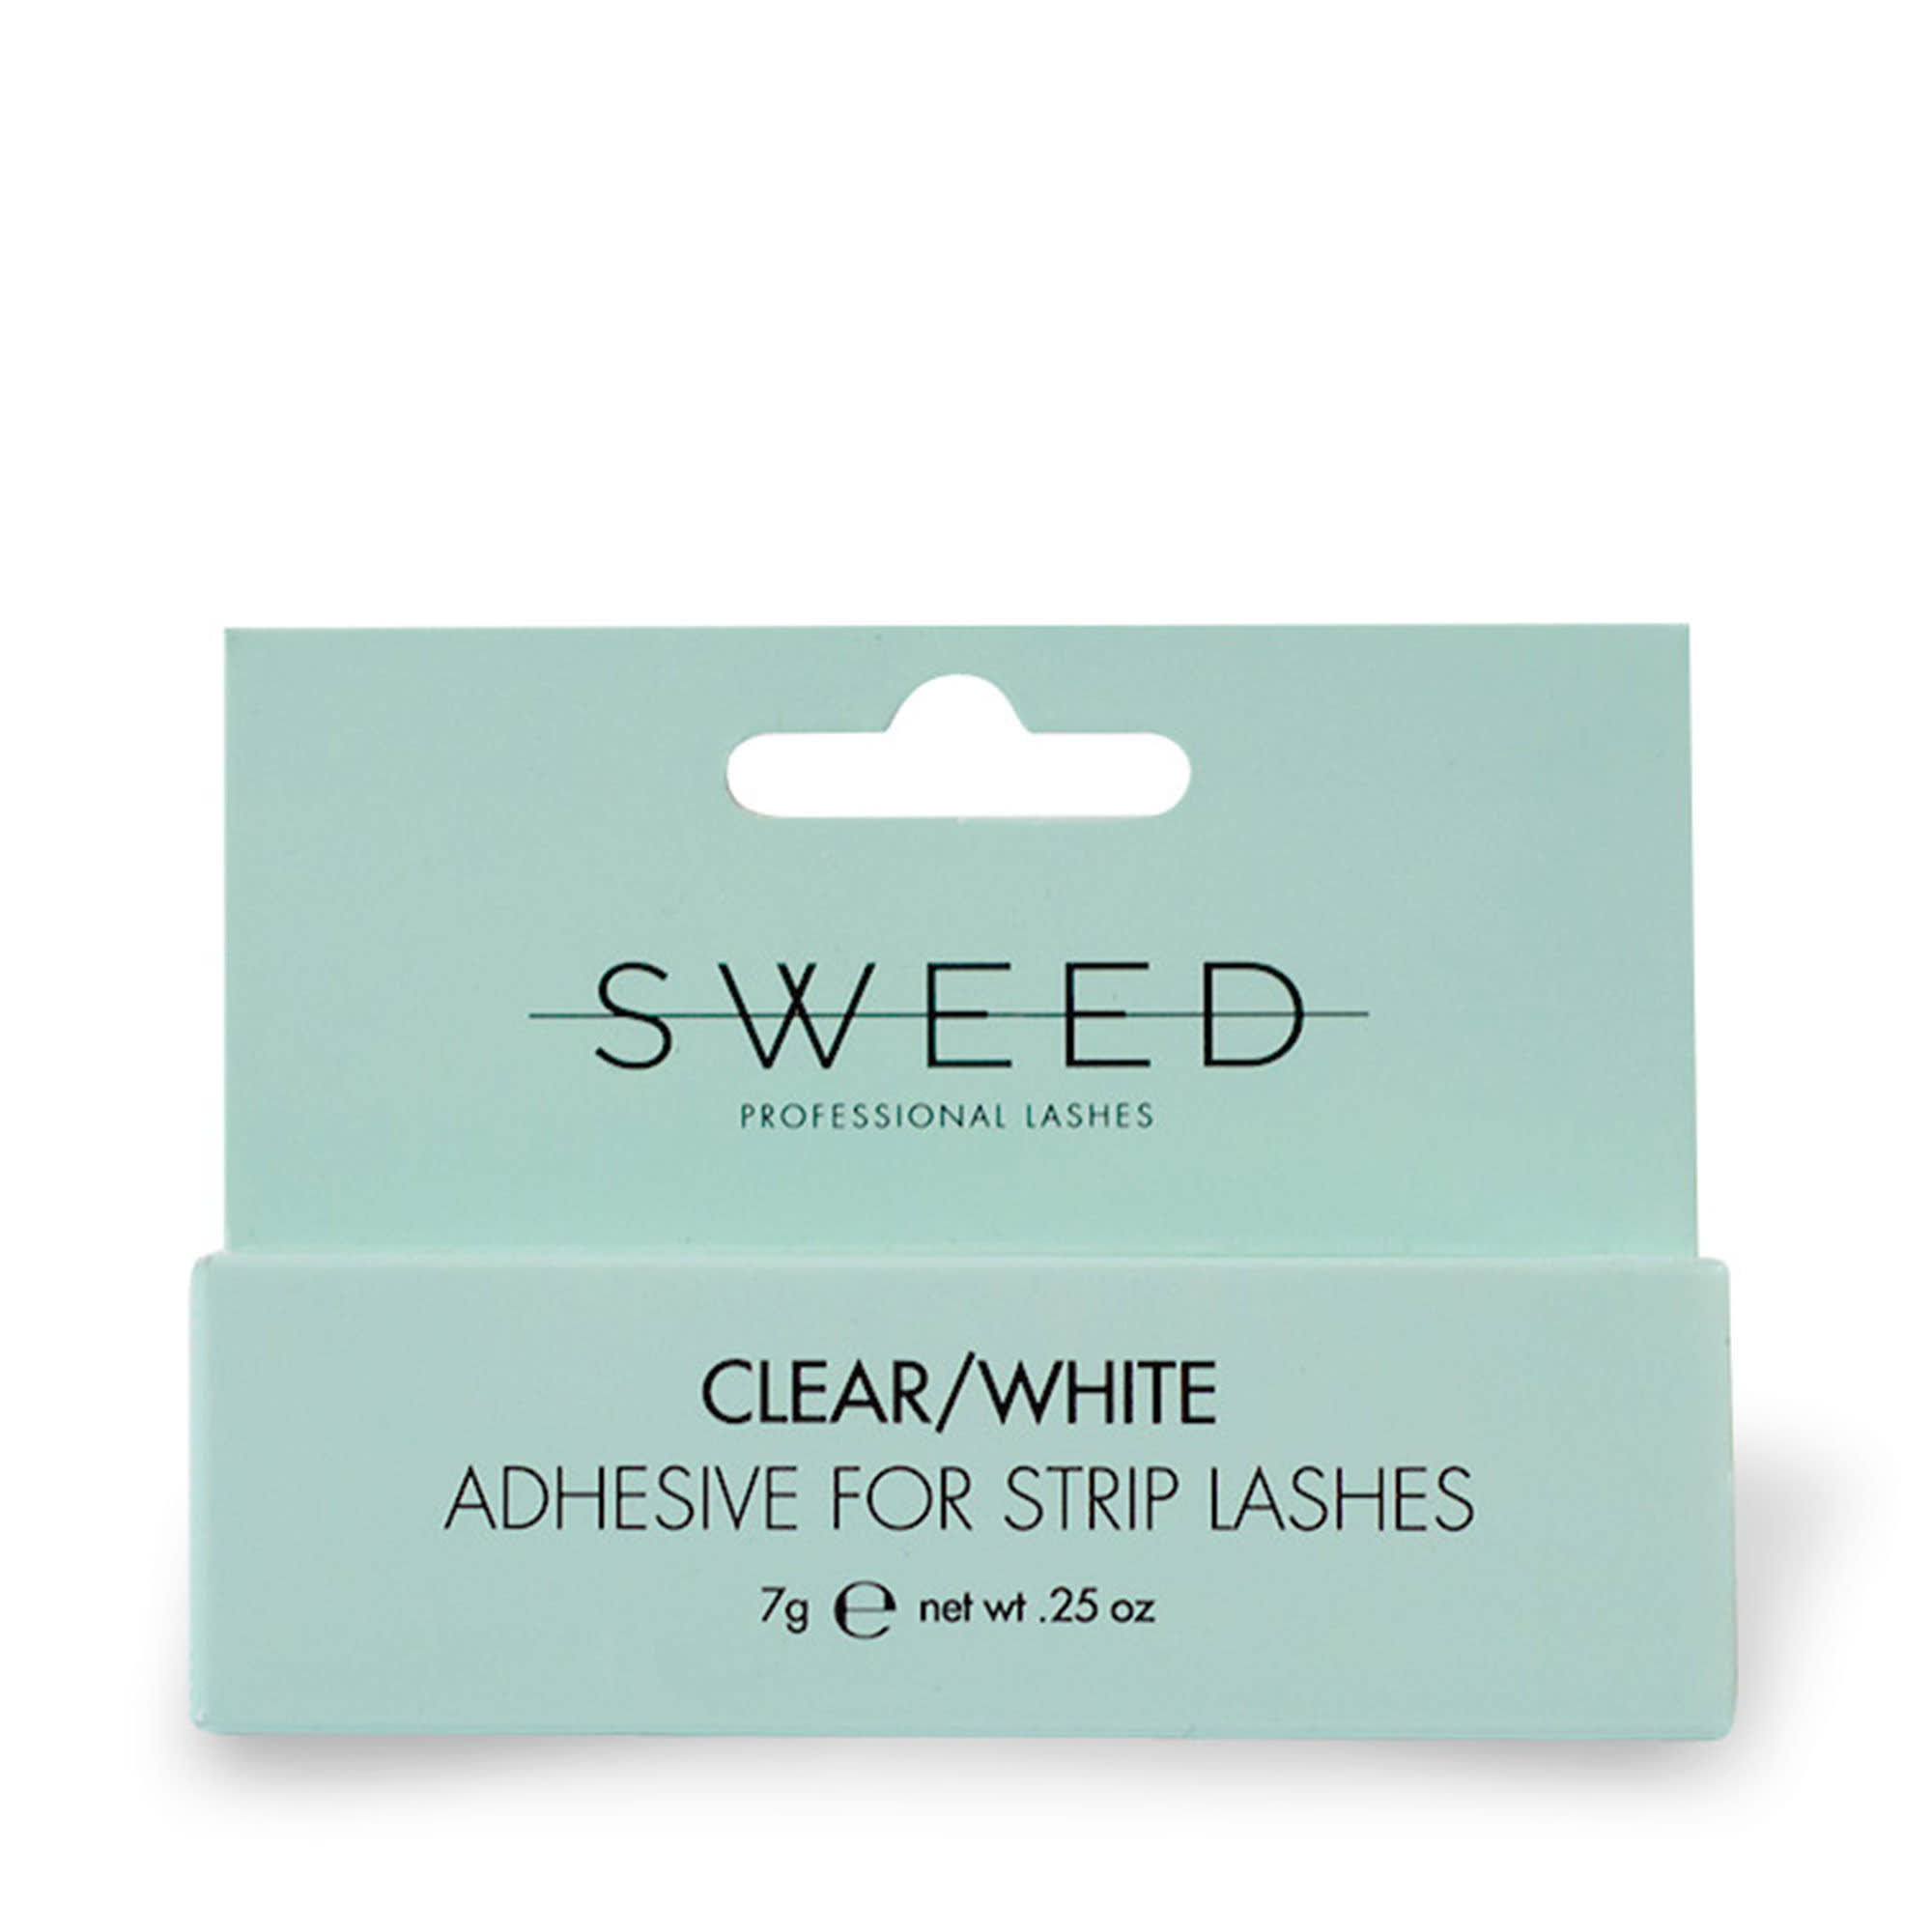 Clear/White Adhesive For Strip Lashes från SWEED